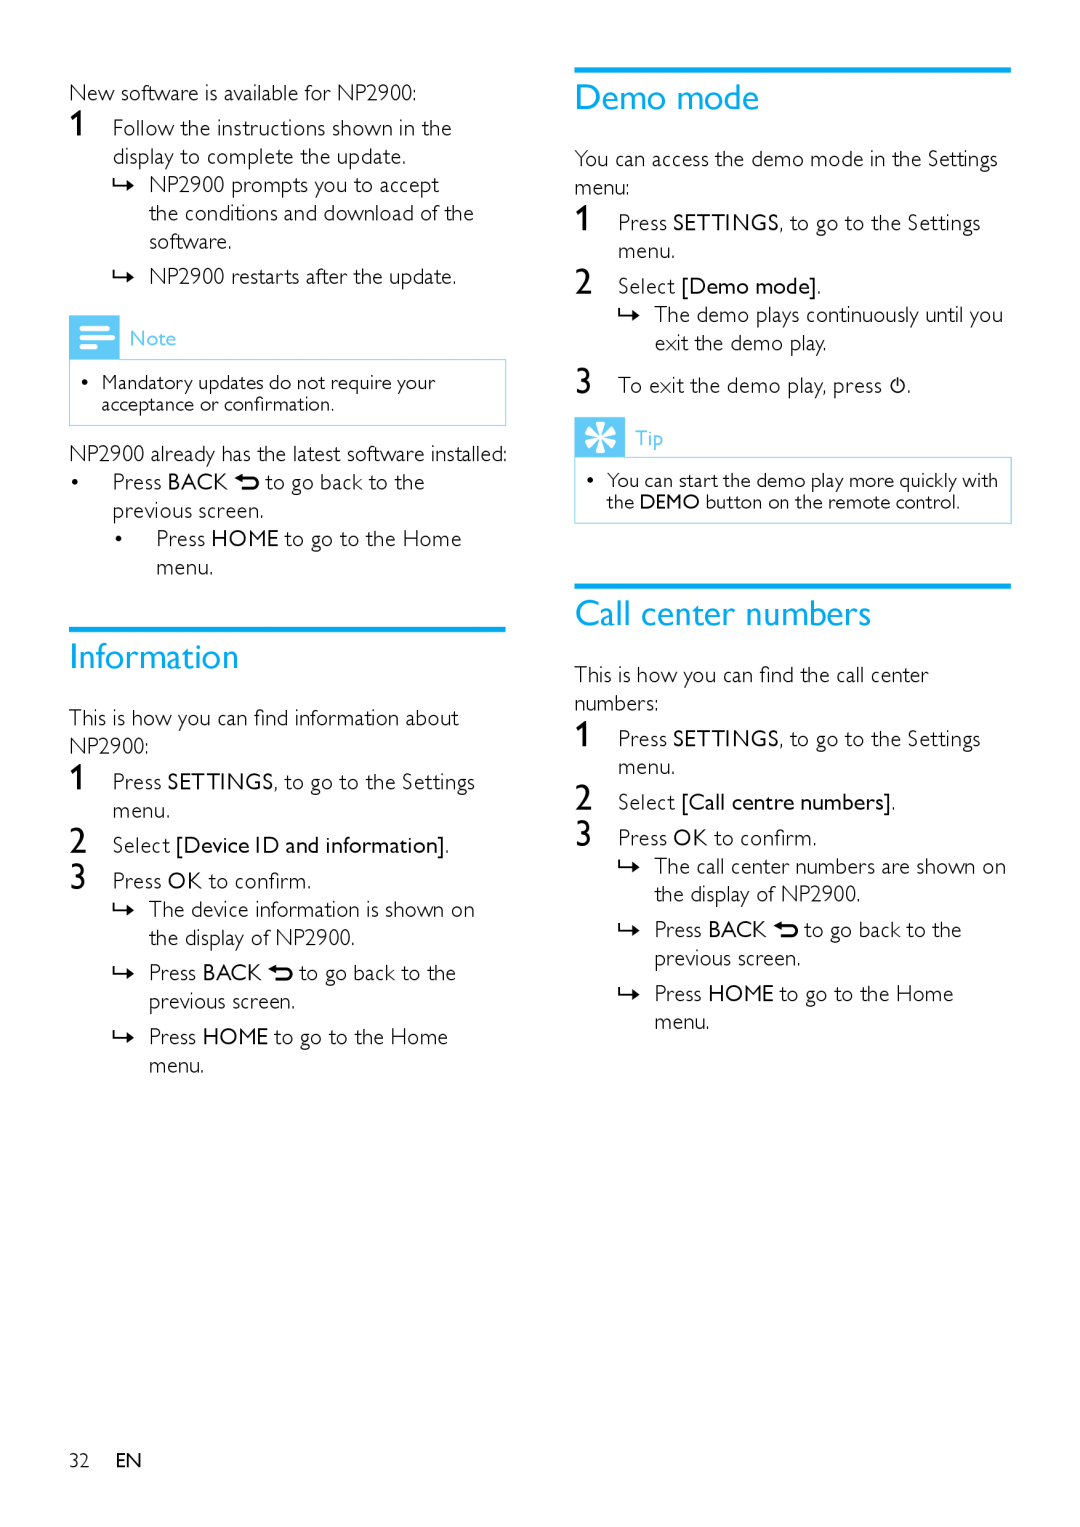 Philips NP2900 user manual Information, Demo mode, Call center numbers 